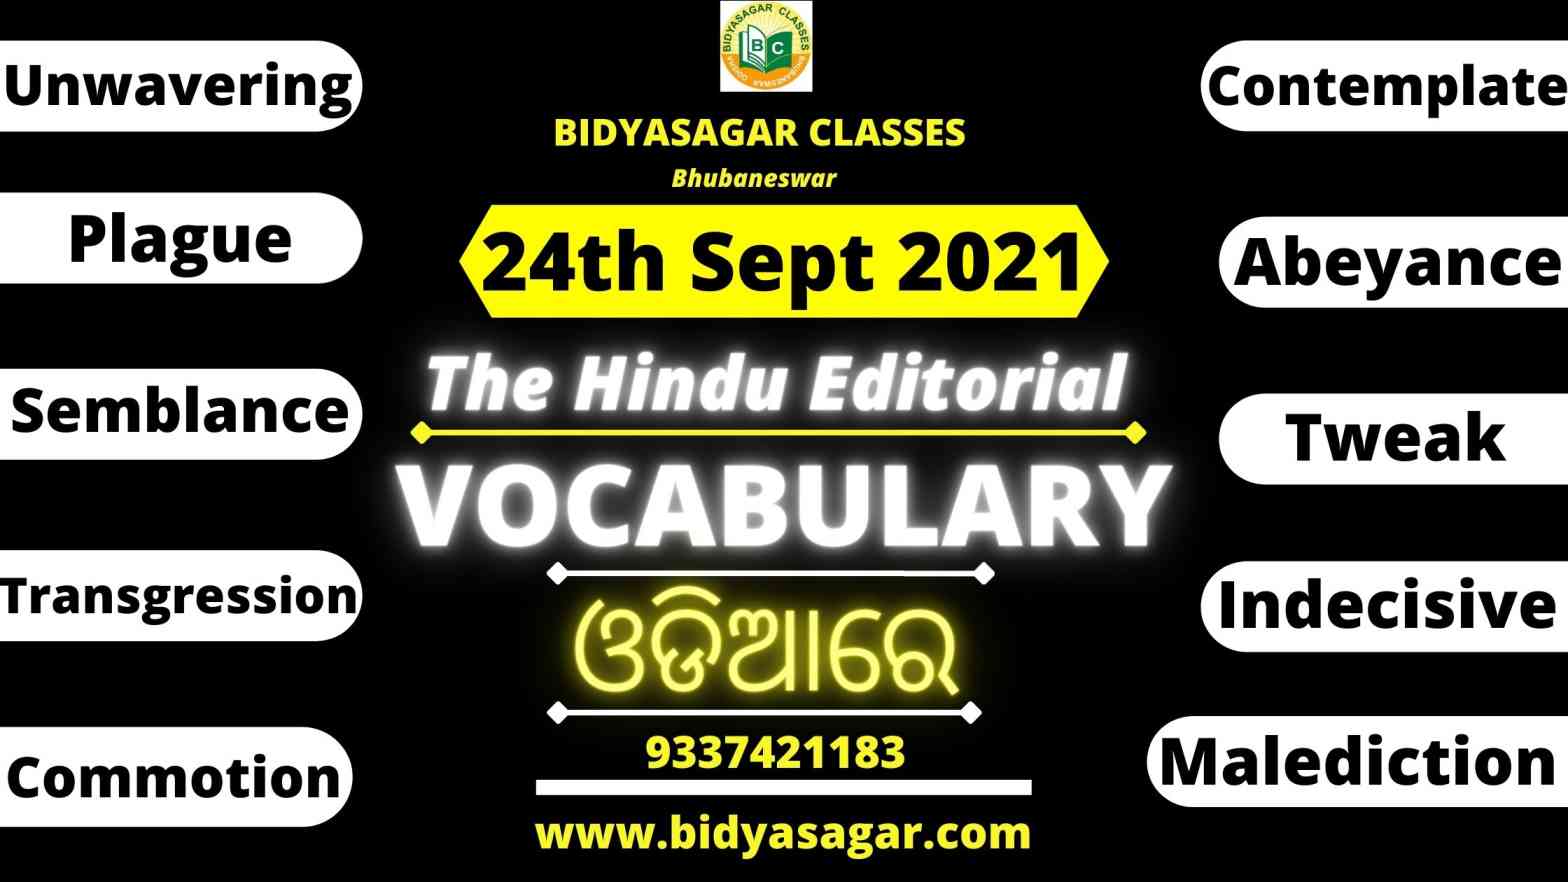 The Hindu Editorial Vocabulary of 24th September 2021